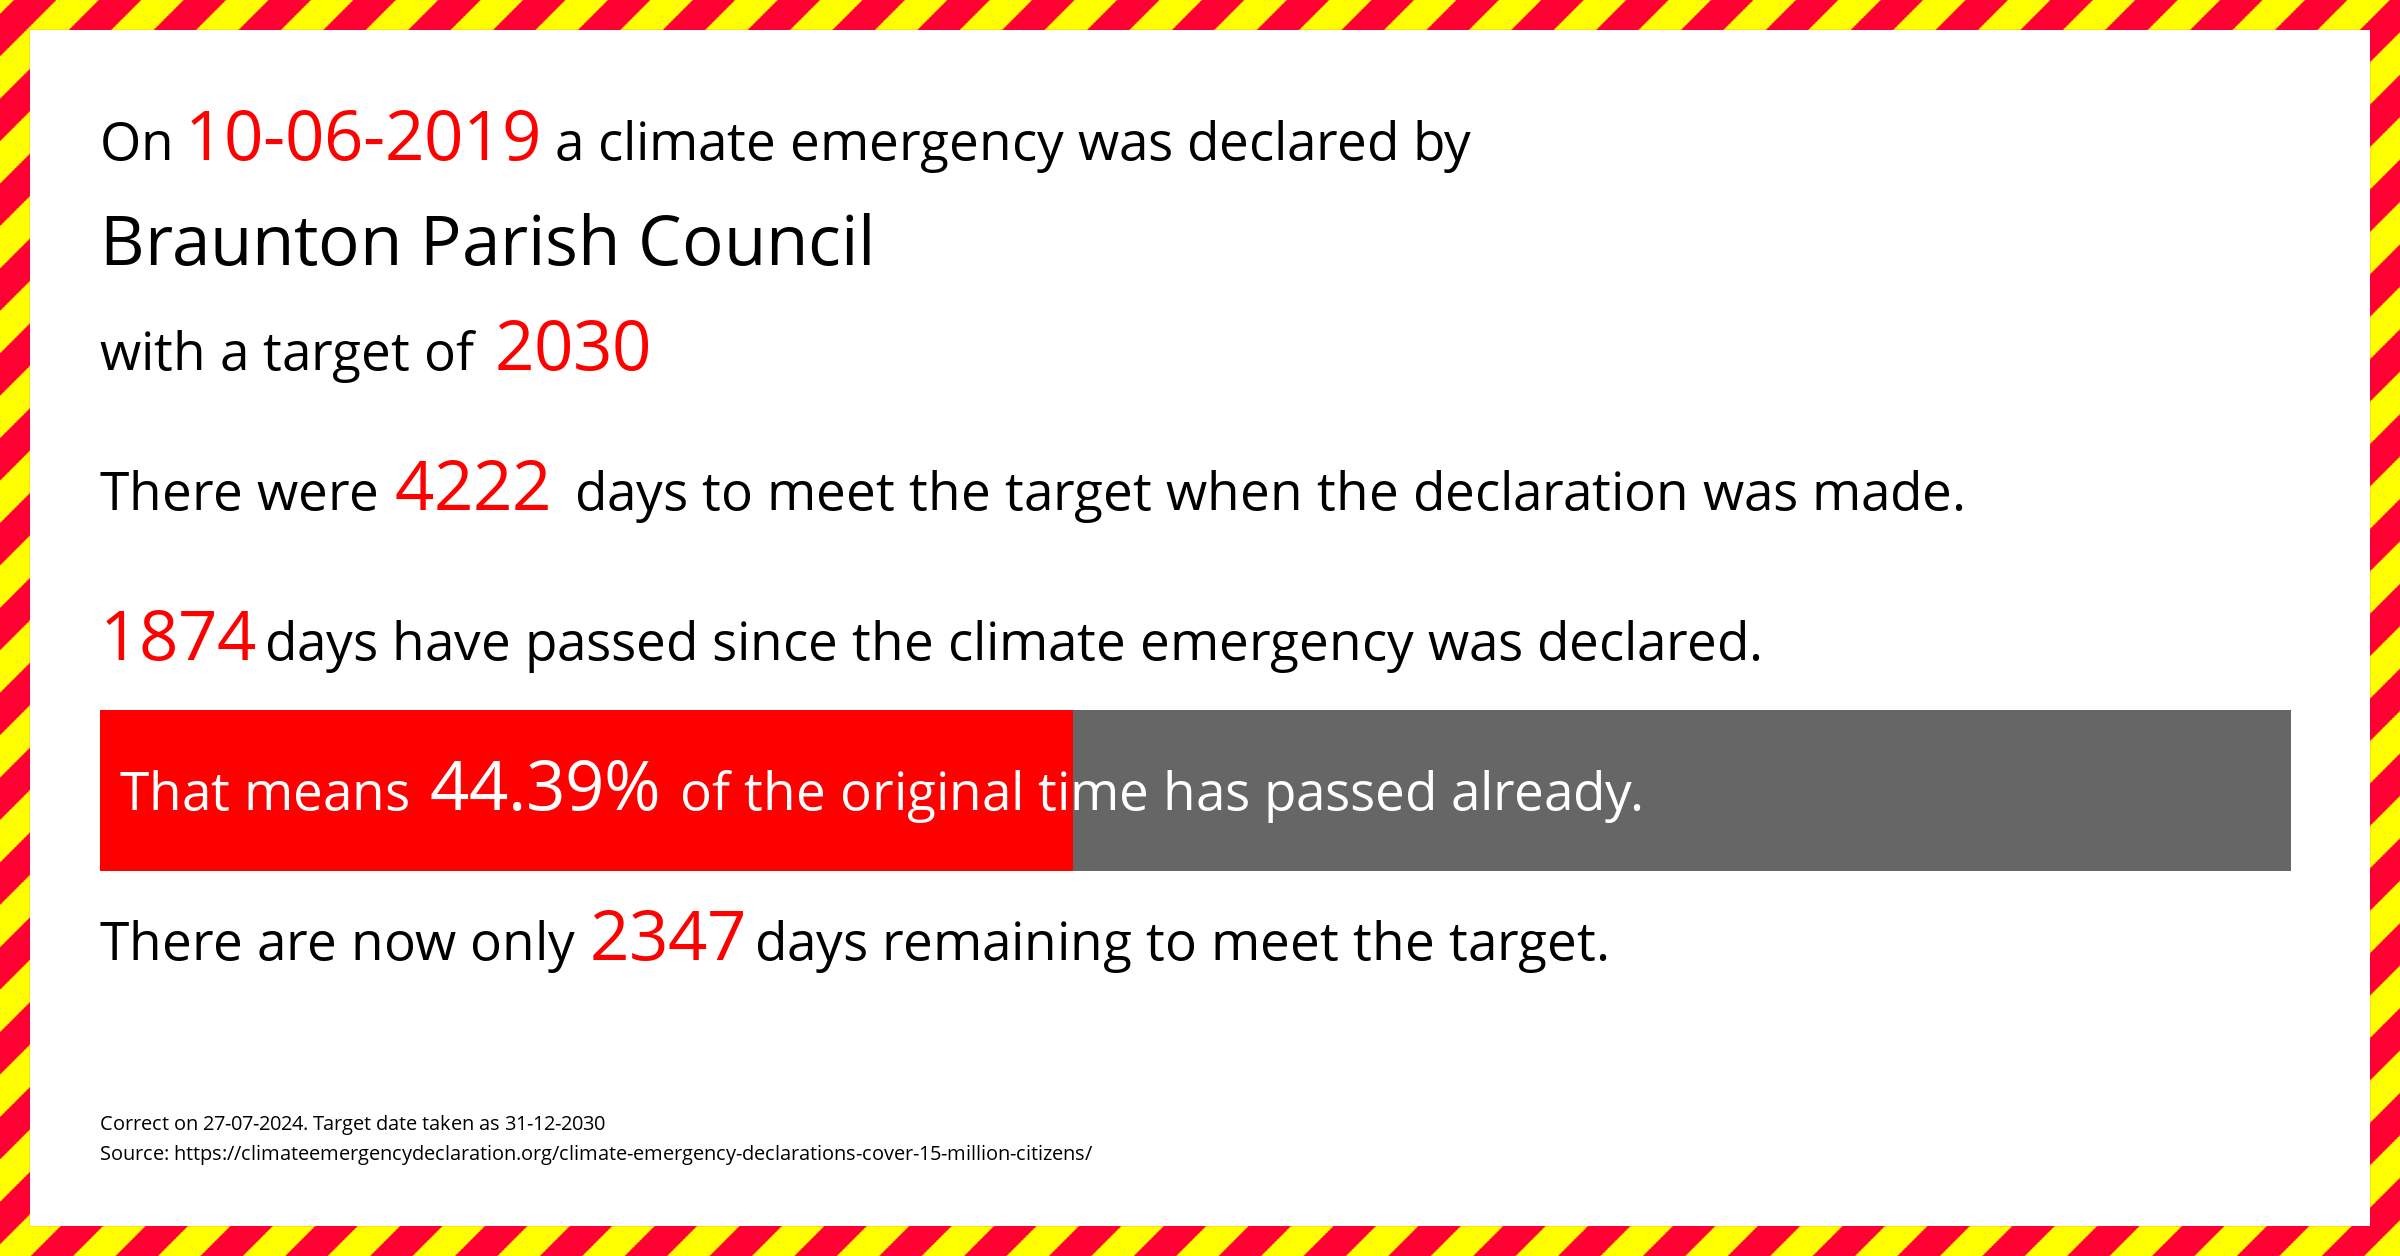 Braunton Parish Council declared a Climate emergency on Monday 10th June 2019, with a target of 2030.